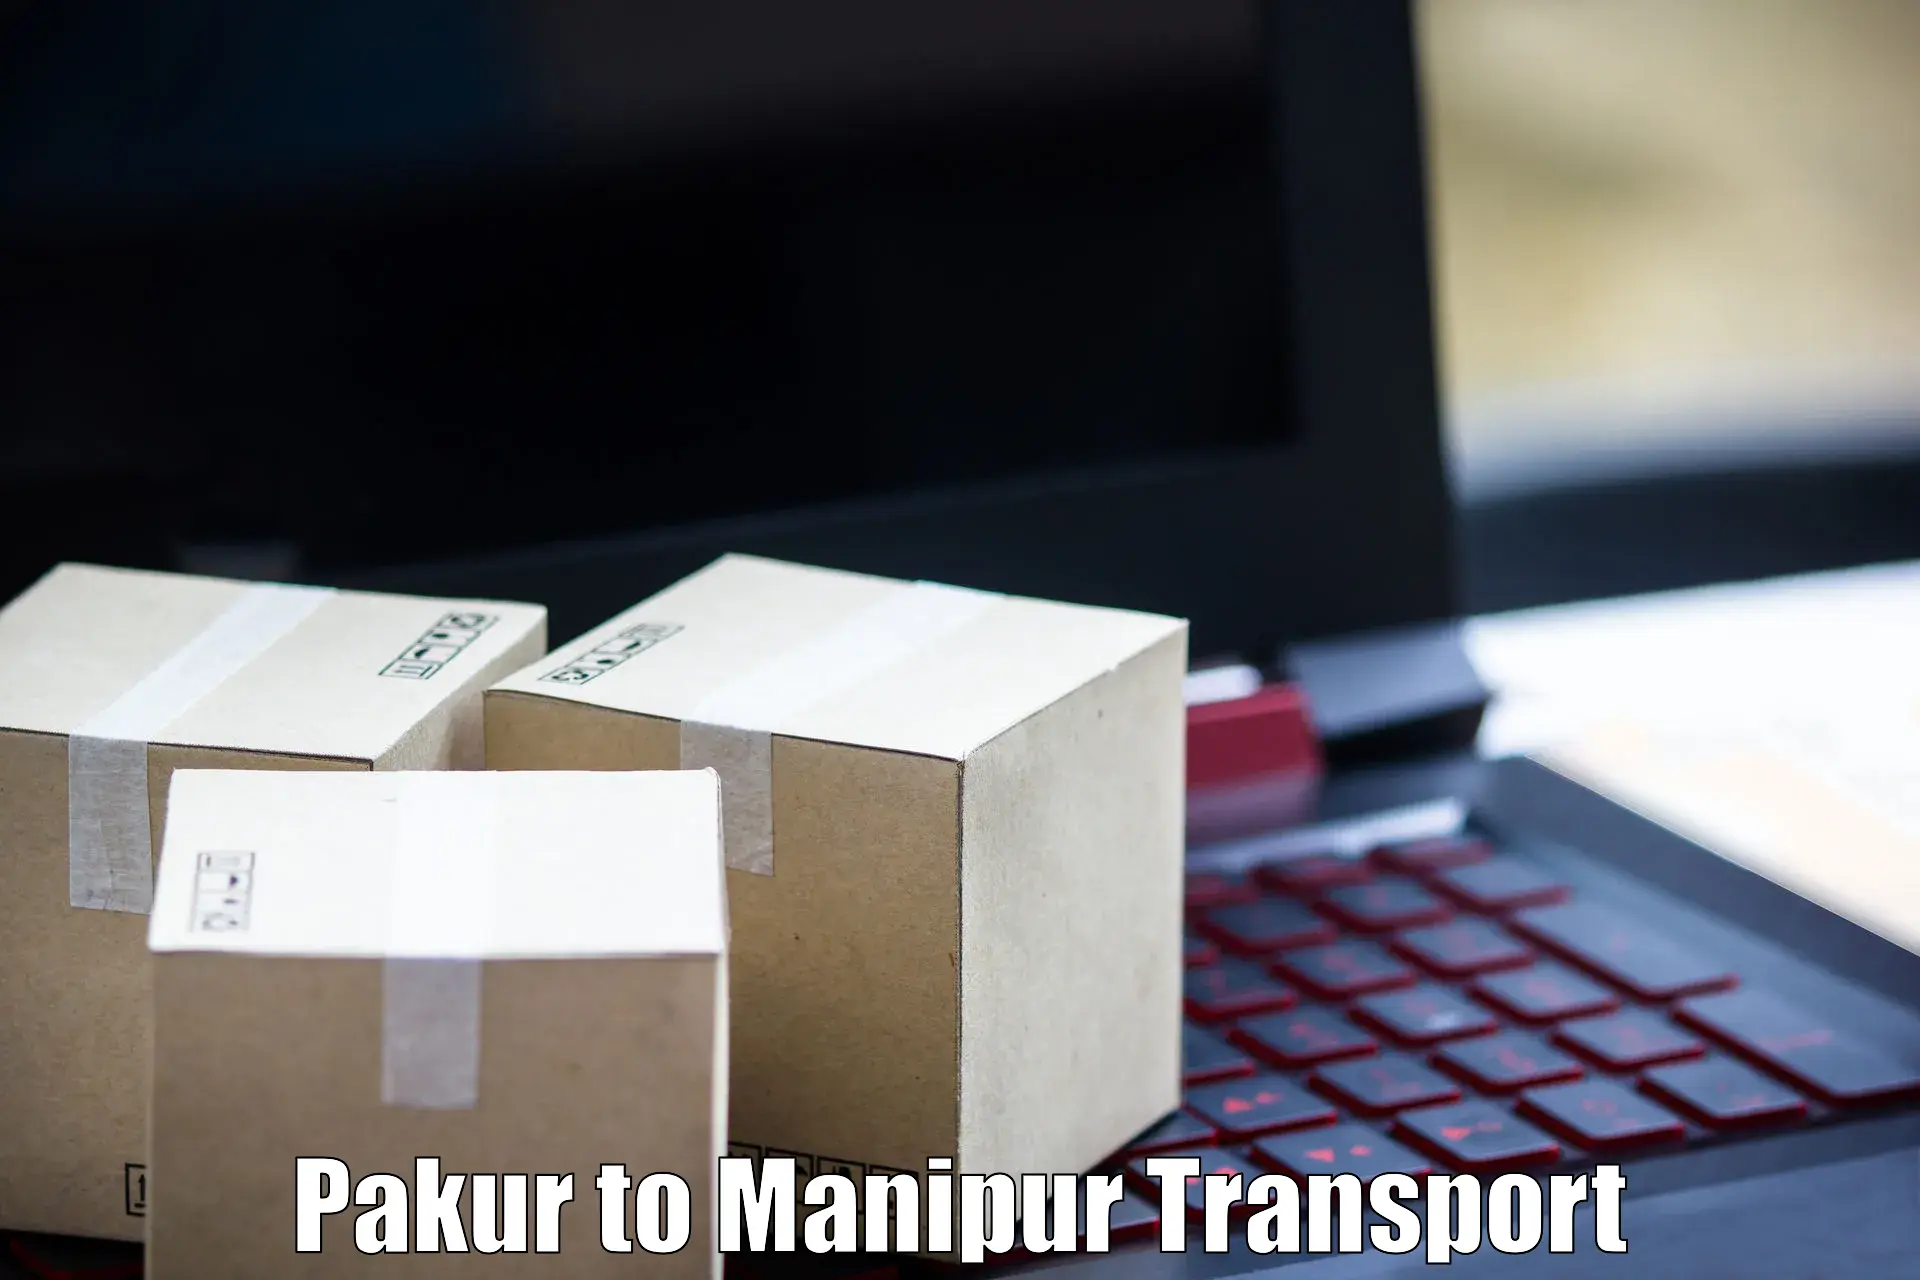 Nearby transport service Pakur to Manipur